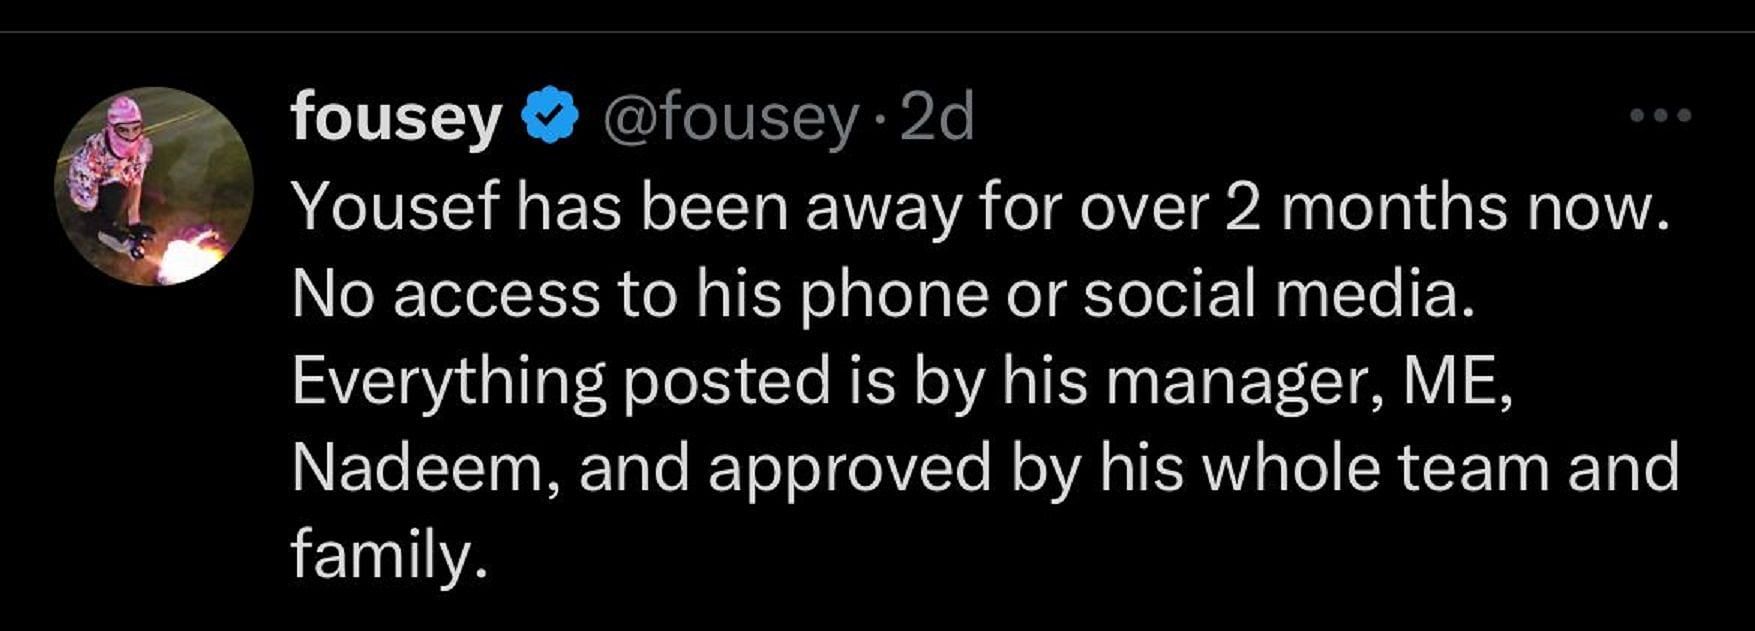 Fousey is likely to return soon, his management confirms (Image via X)